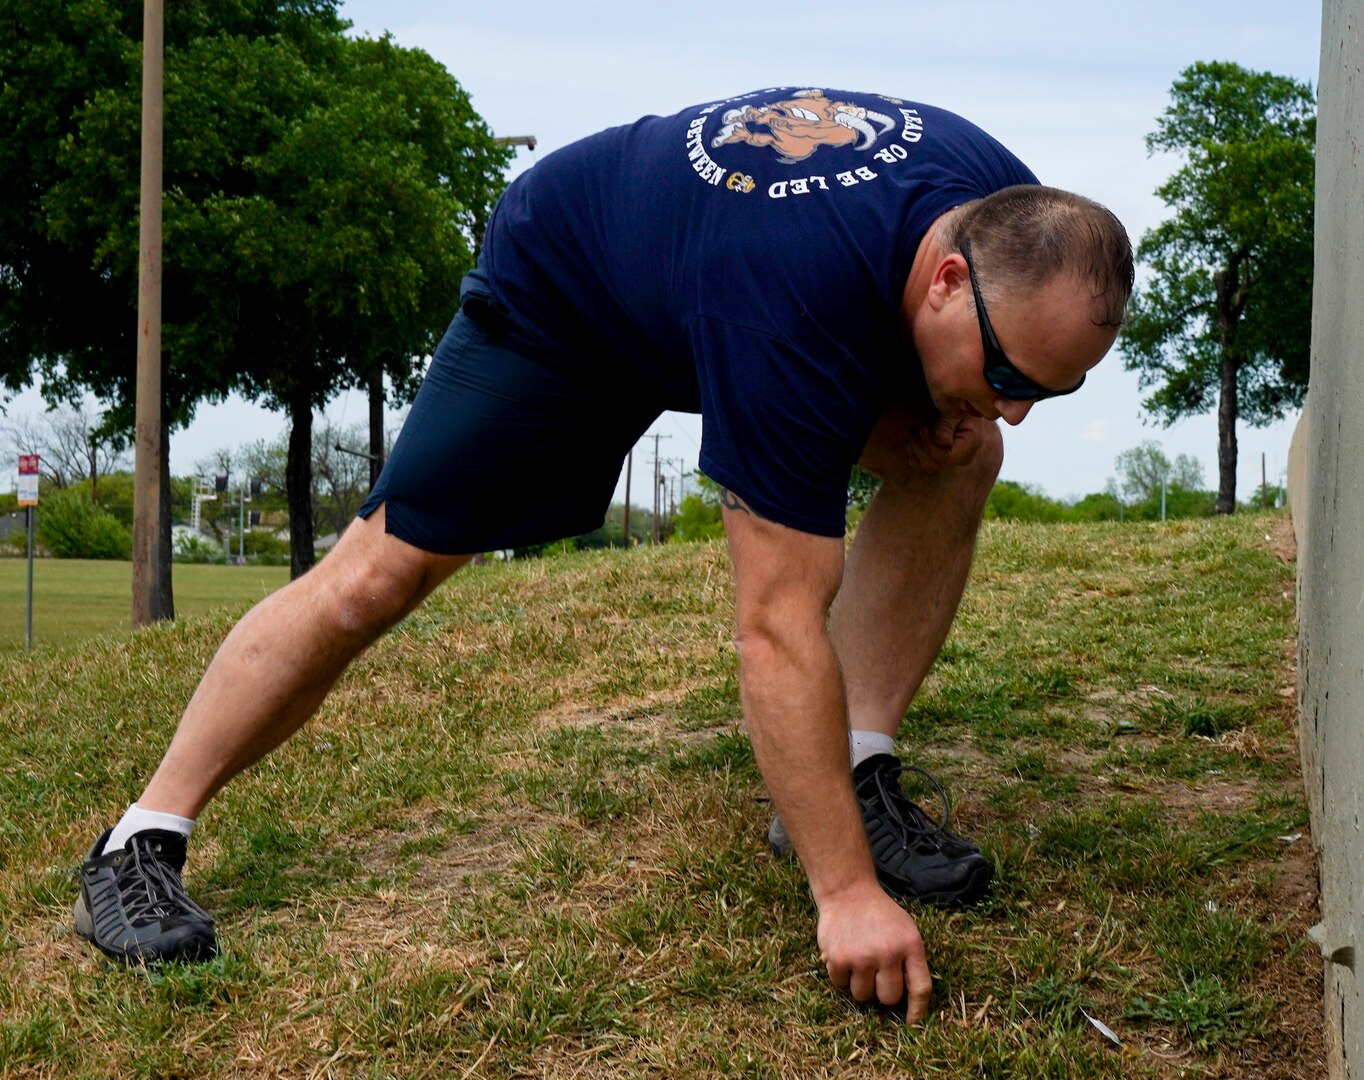 Chief Petty Officer Steven Kellystahlnecker, assigned to Navy Medicine Education, Training and Logistics Command at Joint Base San Antonio-Fort Sam Houston, picks up trash during a community relations event held at Martinez Park during a Sailor 360 event. Sailor 360 is a command-level program for junior enlisted, senior enlisted and junior officers designed to strengthen and develop leadership through COMREL events, classroom discussions and physical training events.